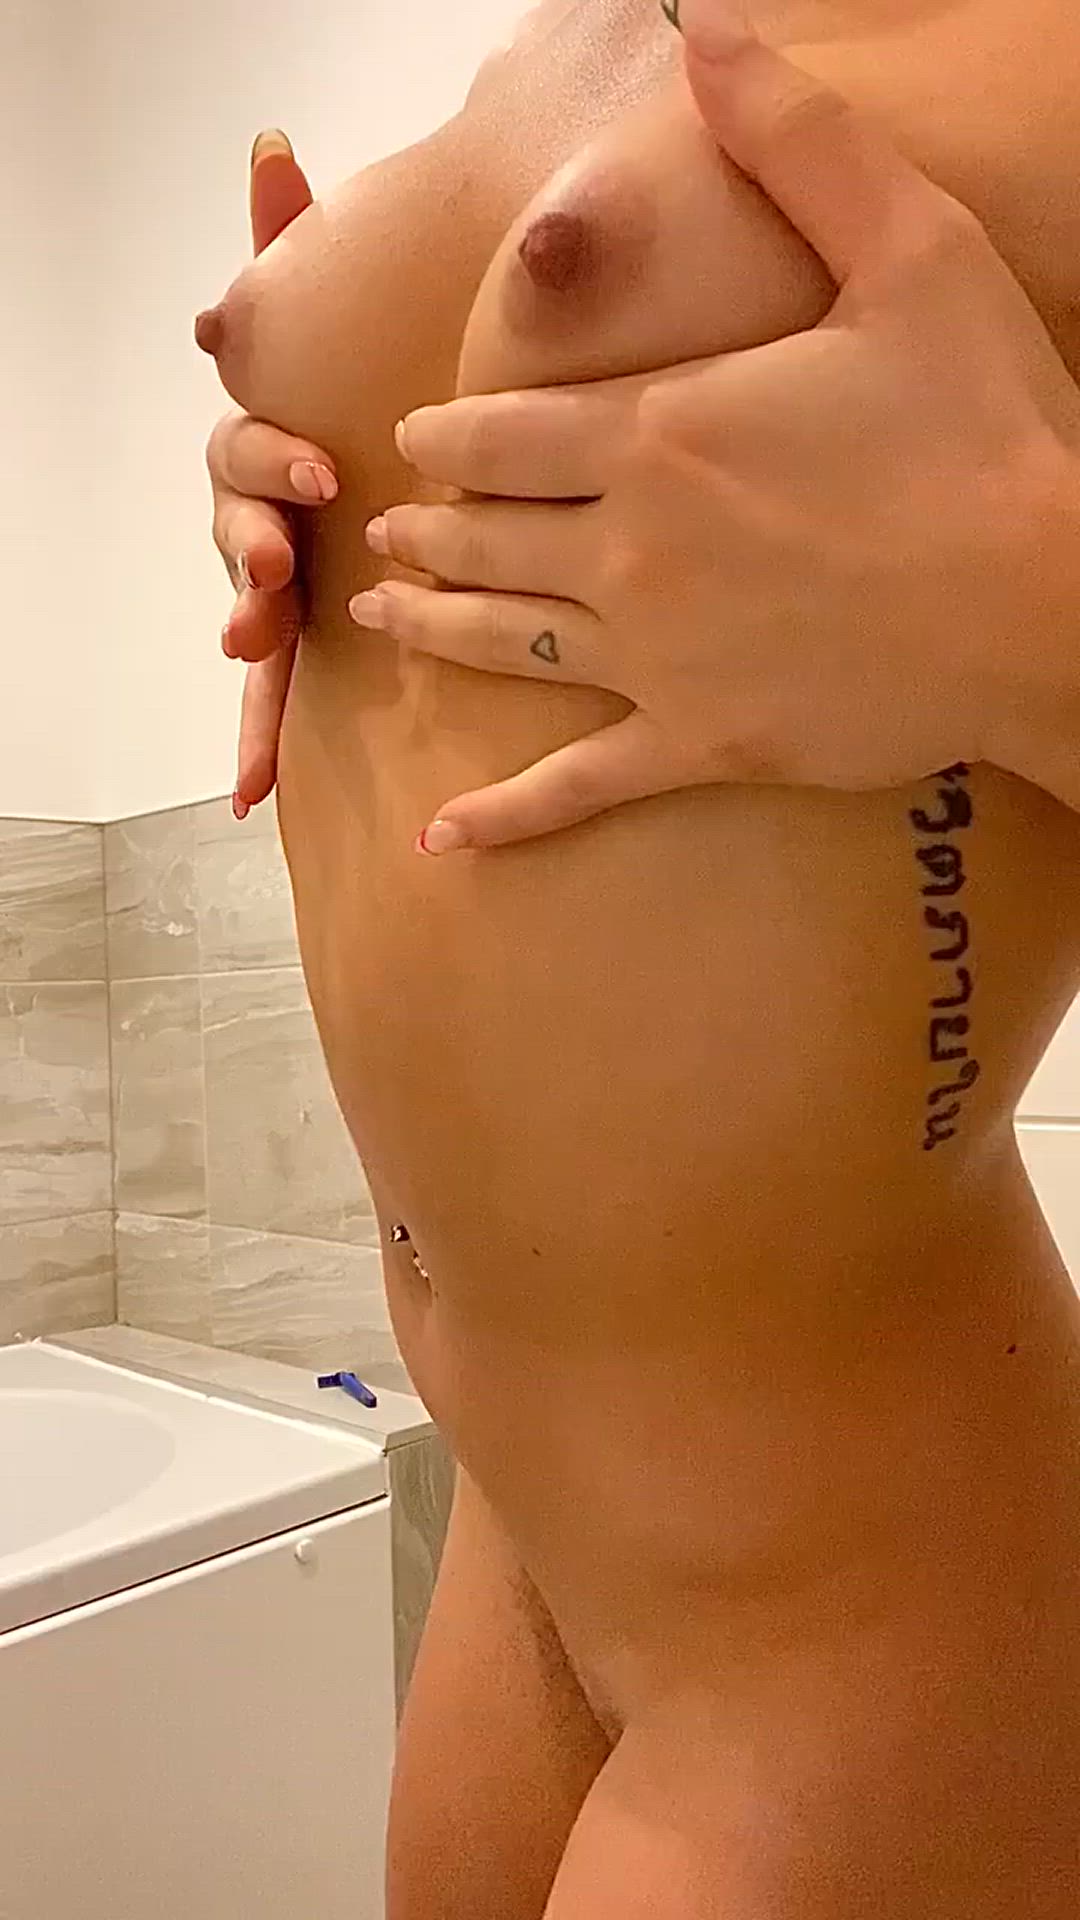 Anal porn video with onlyfans model Issa✨ <strong>@aliaissa</strong>